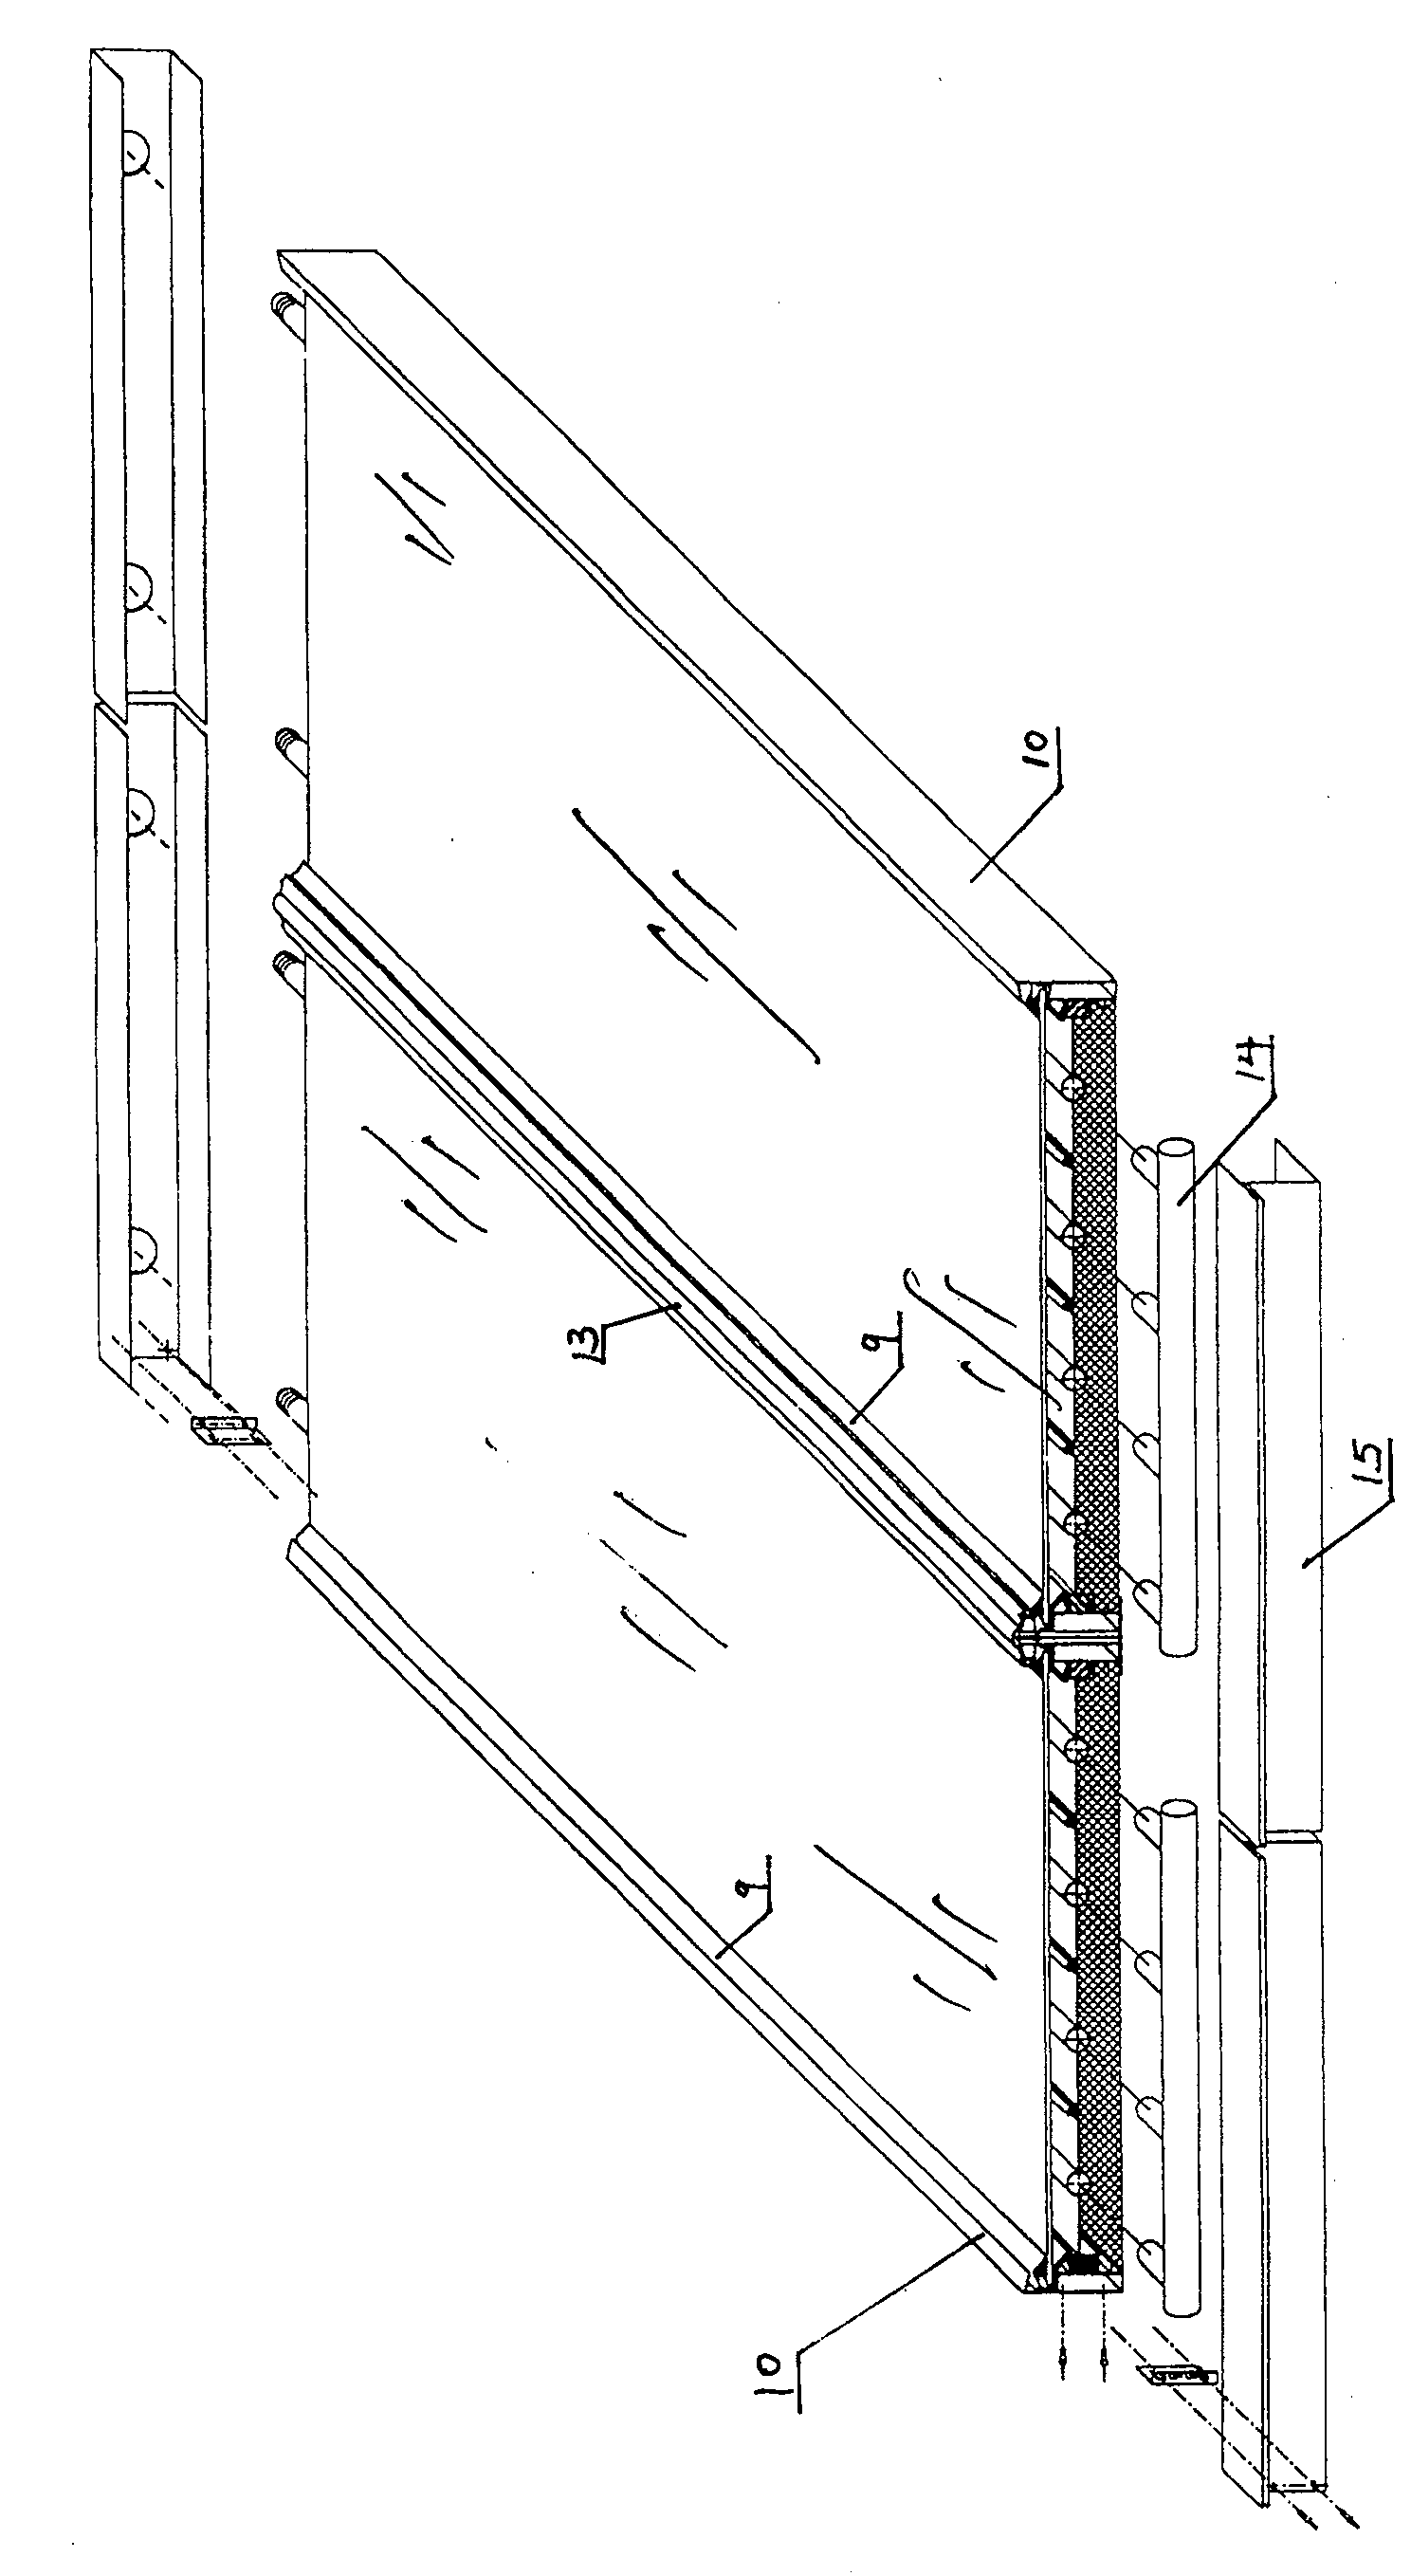 Multi-purpose building element board having solar energy collection function